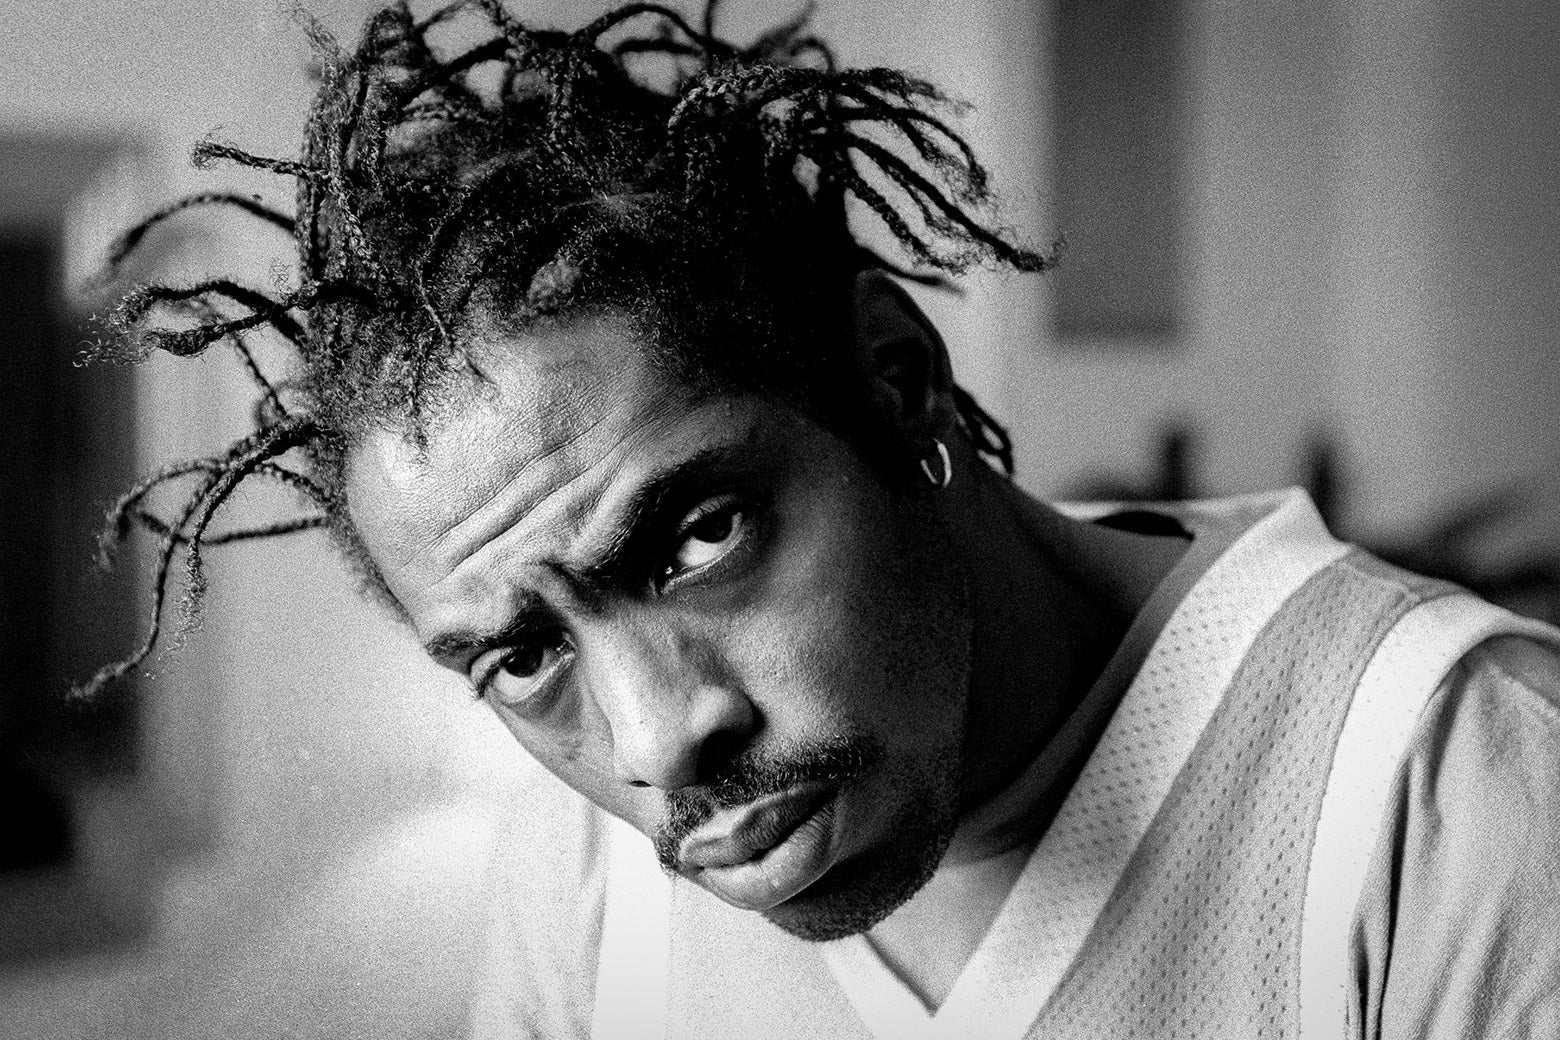 A black-and-white photo shows him just as you remember him, his braids emerging in twists from his head, his eyes piercing, as he stares at the viewer